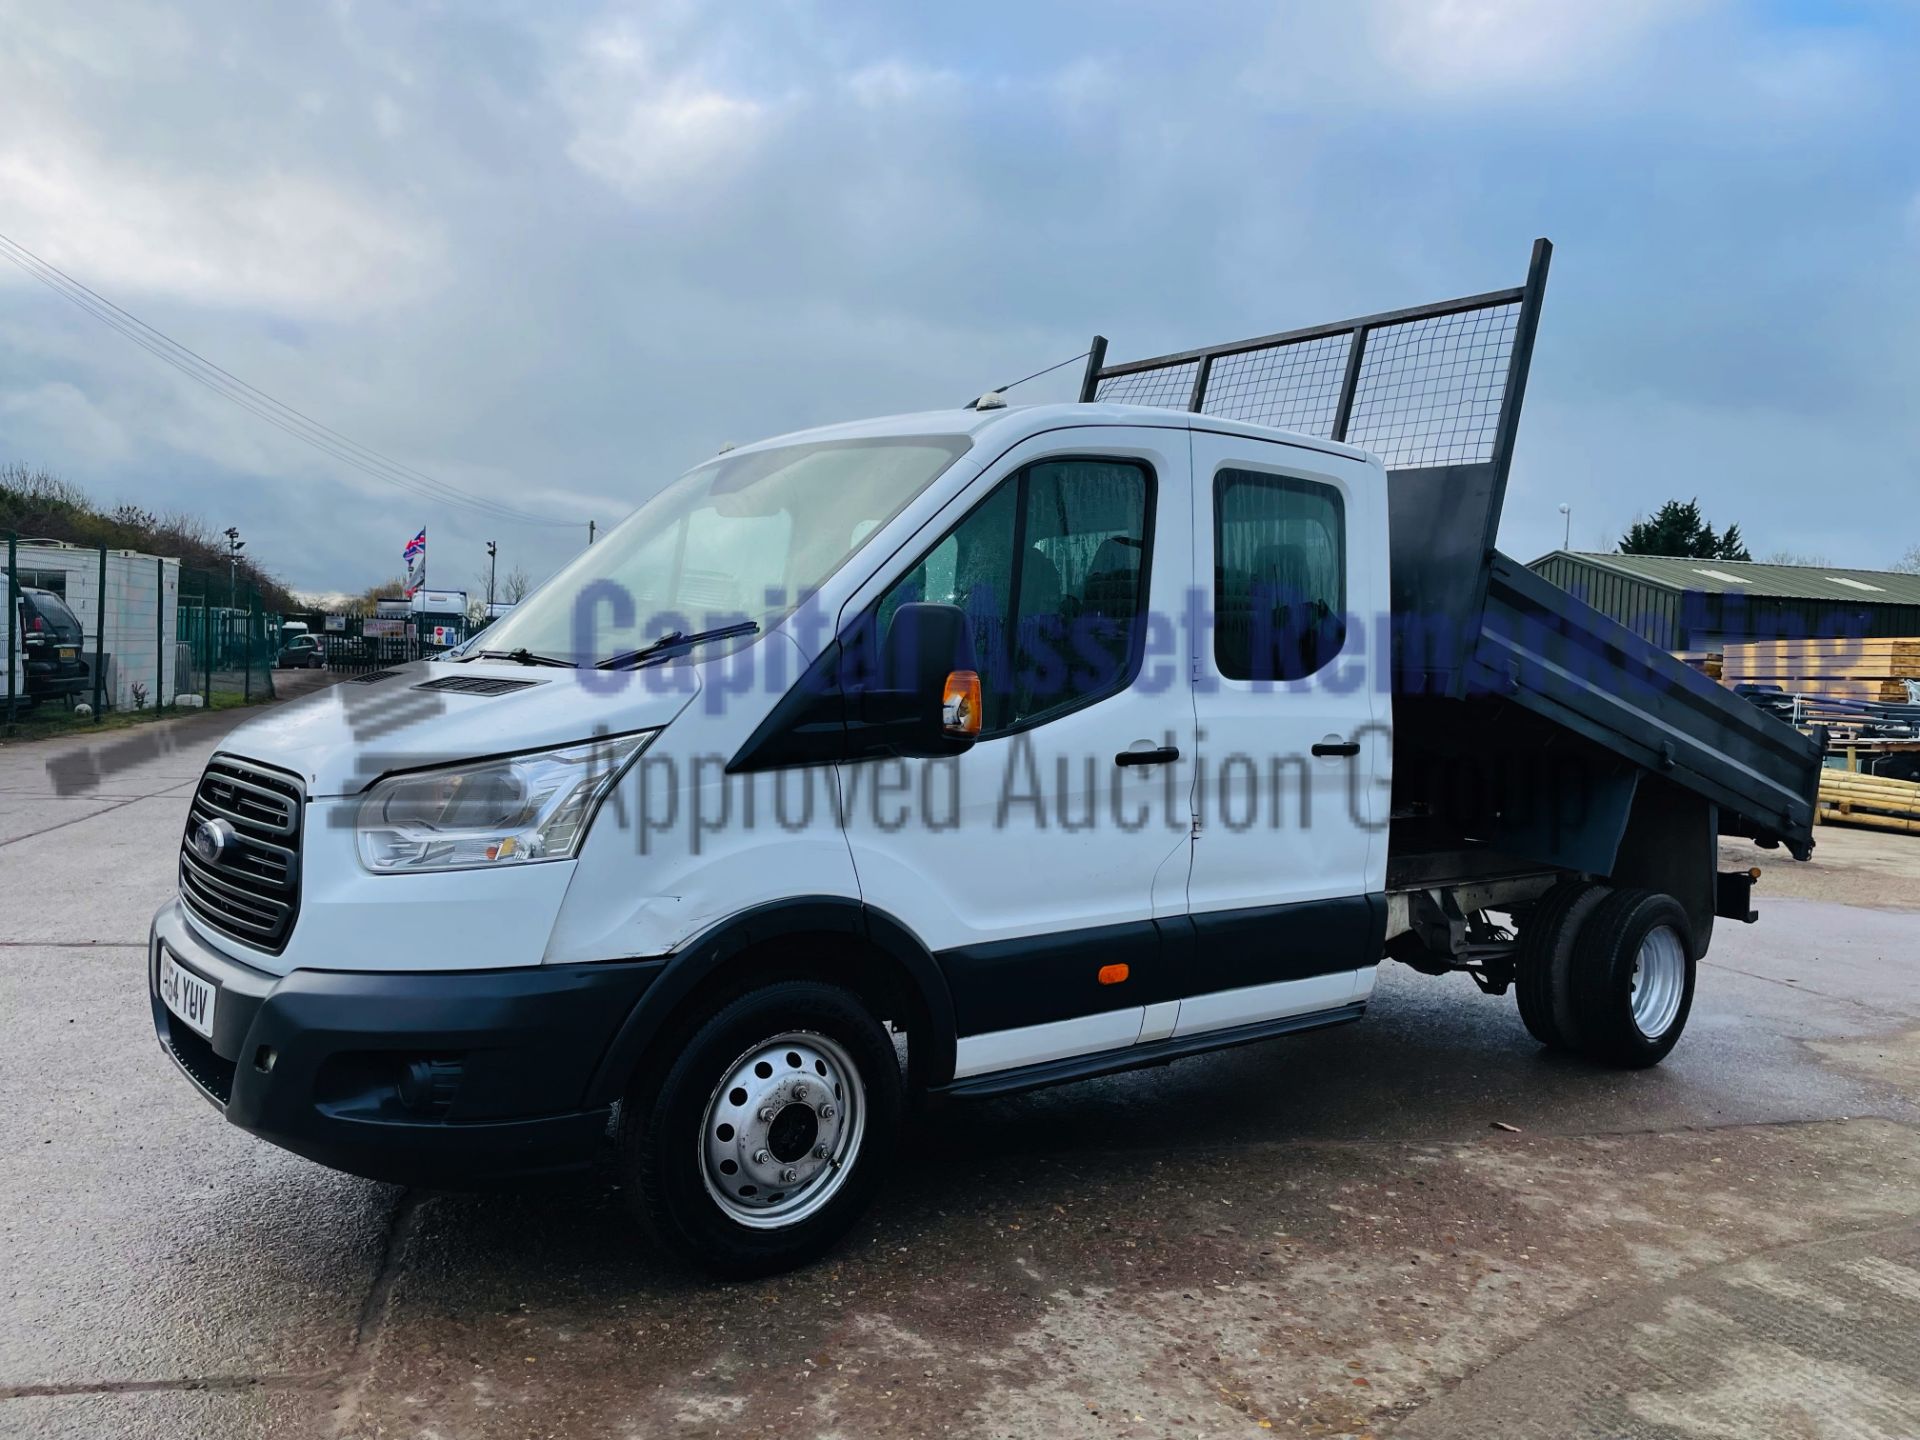 FORD TRANSIT *7 SEATER - DOUBLE CAB TIPPER* (2015) '2.2 TDCI - 125 BHP - 6 SPEED' (3500 KG) - Image 10 of 48